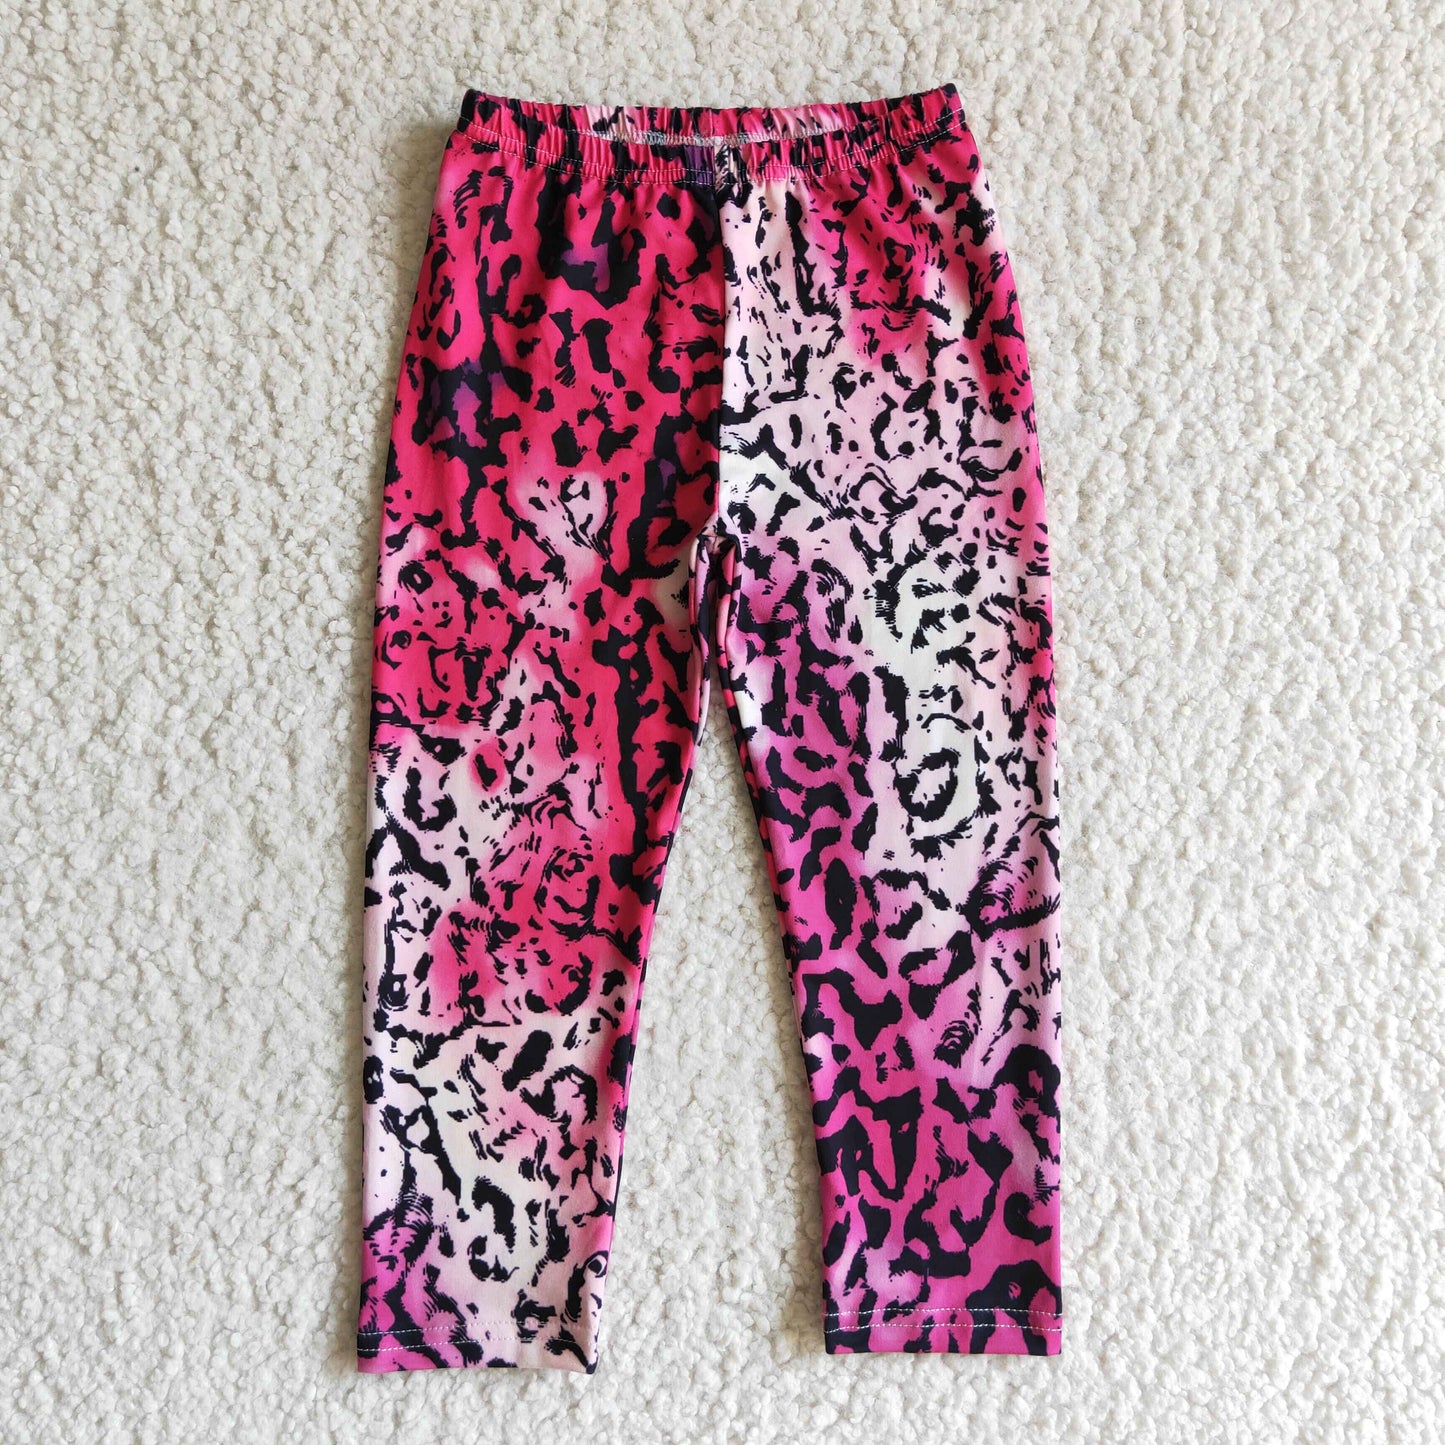 Hot pink leopard baby girls icing leggings